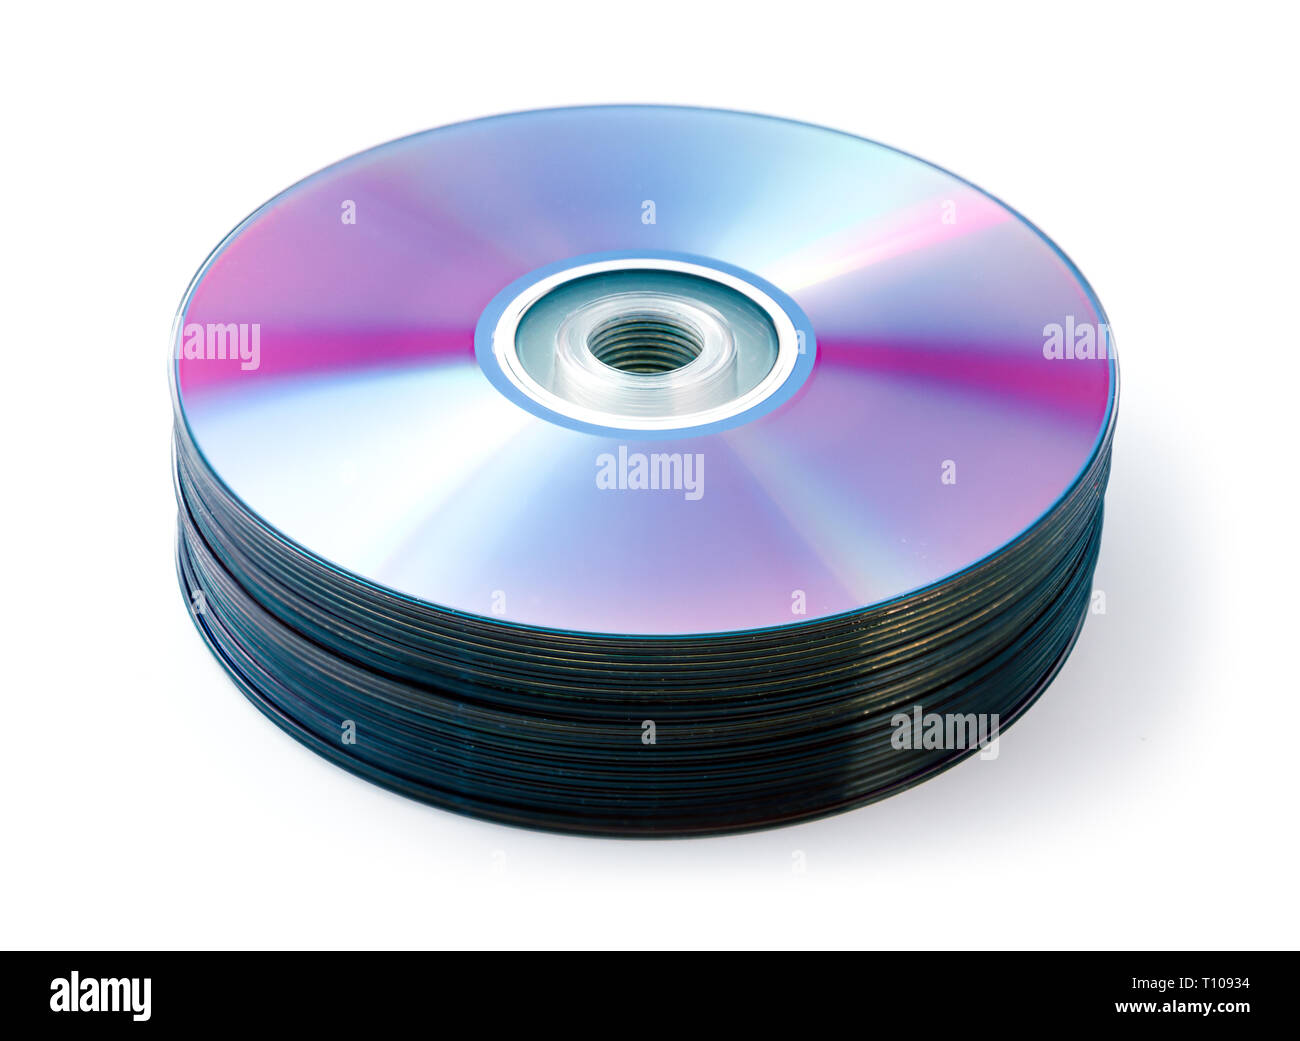 Optical storage Cut Out Stock Images & Pictures - Page 2 - Alamy